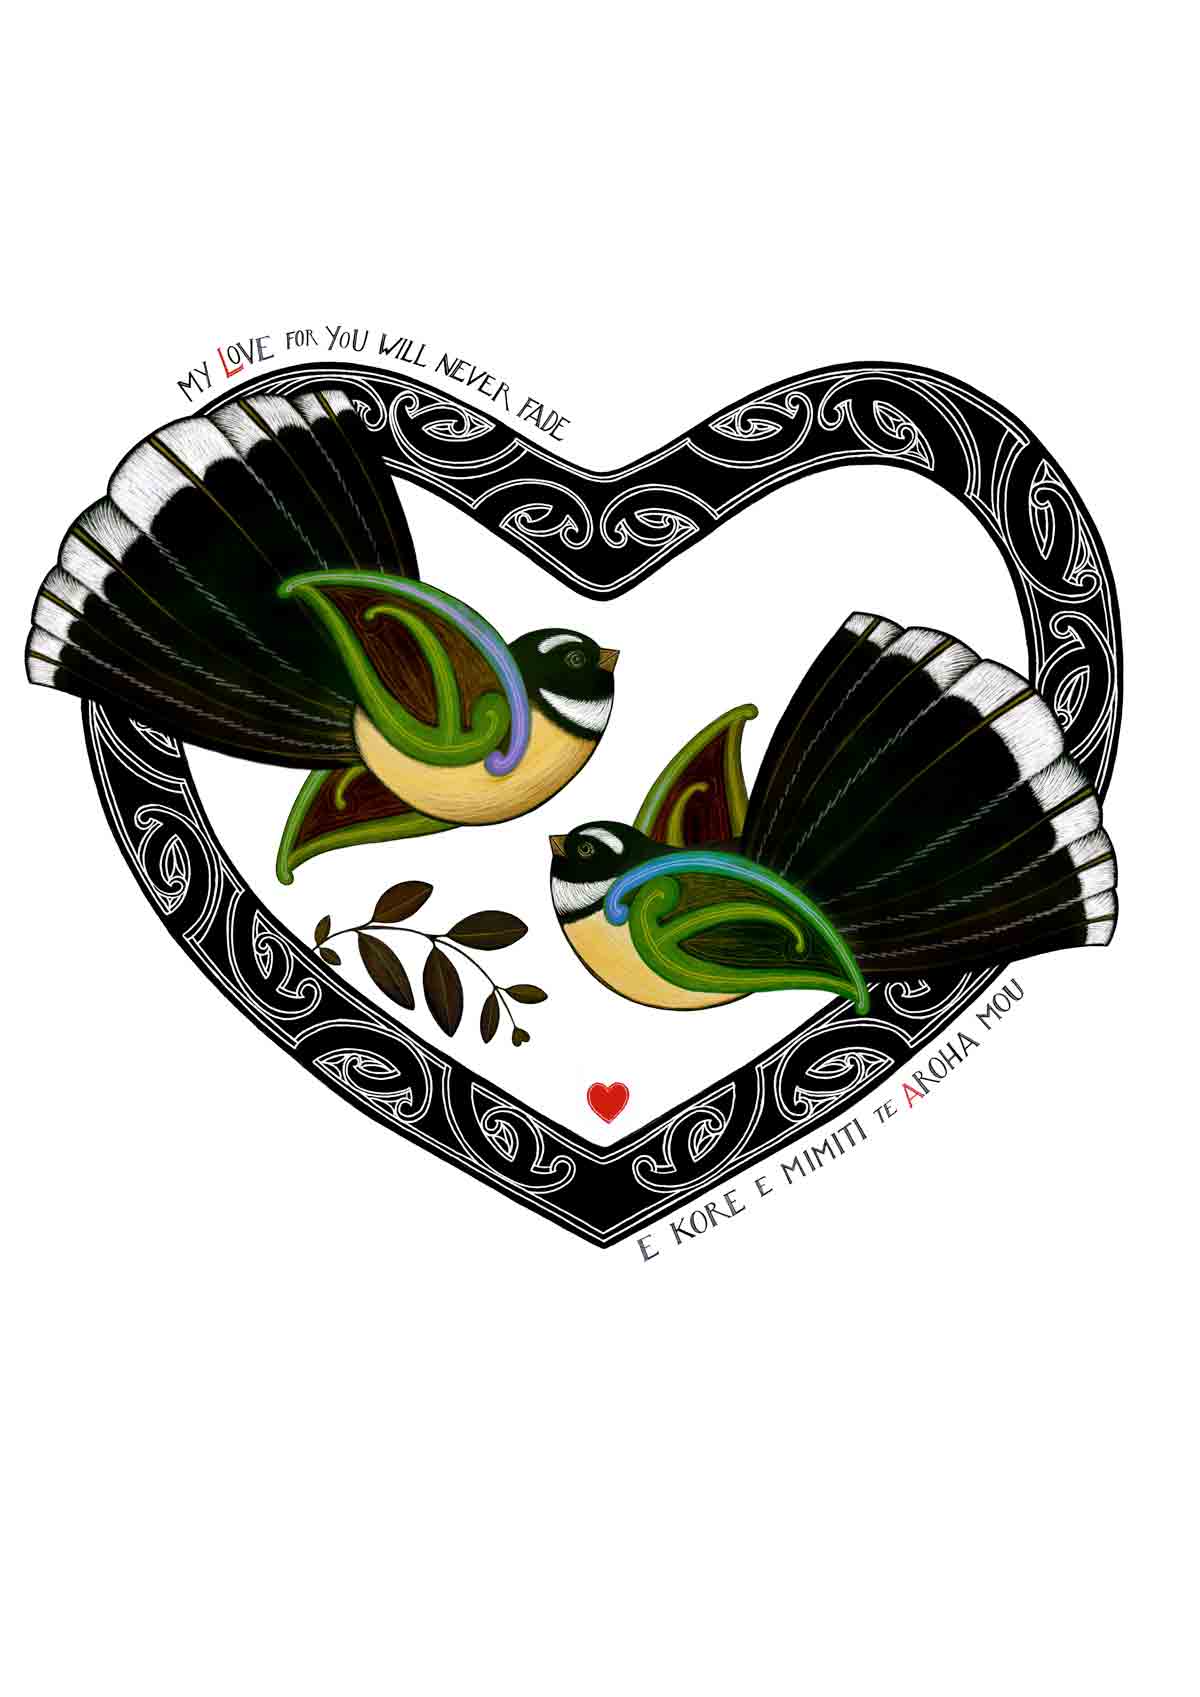 aroha love piwakawaka fantails print. My love for you will never fade in te reo maori with english translation. Two fantails in a heart with maori art design. nz print by amber smith